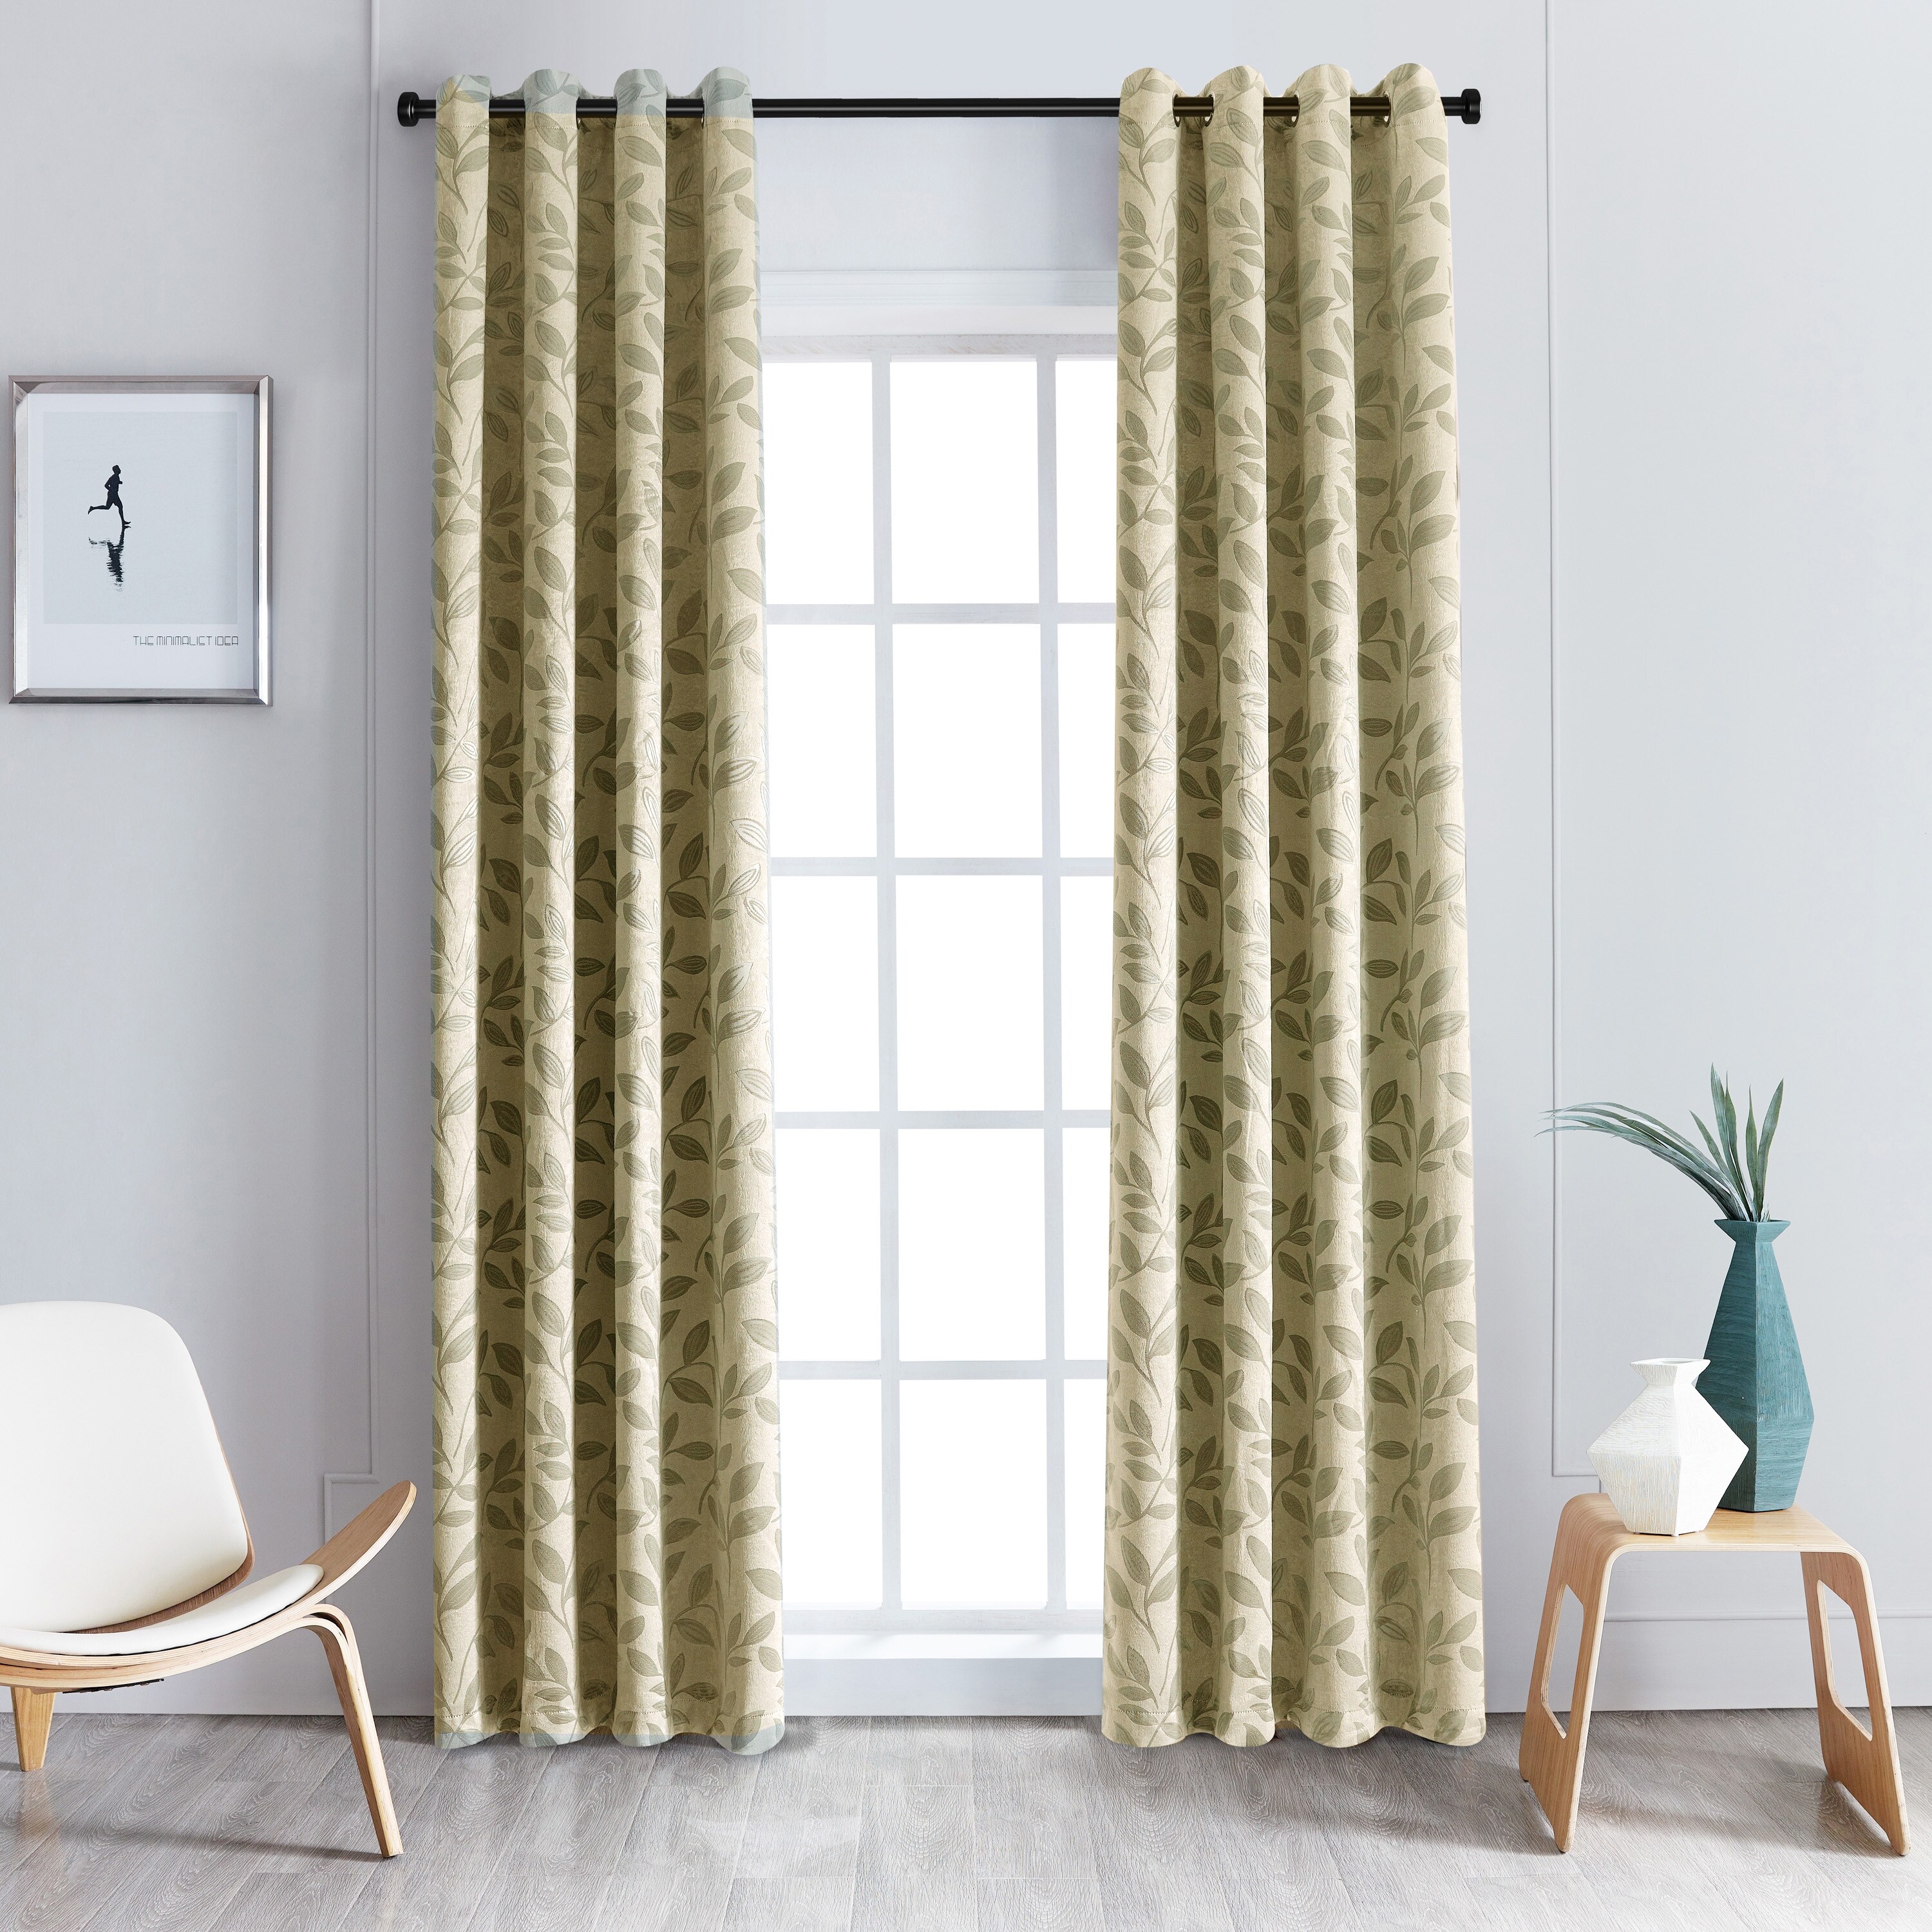 Details about   Burning Godzilla Thicken Blackout Curtain Panels Thermal Window Drapes 2 Panels 